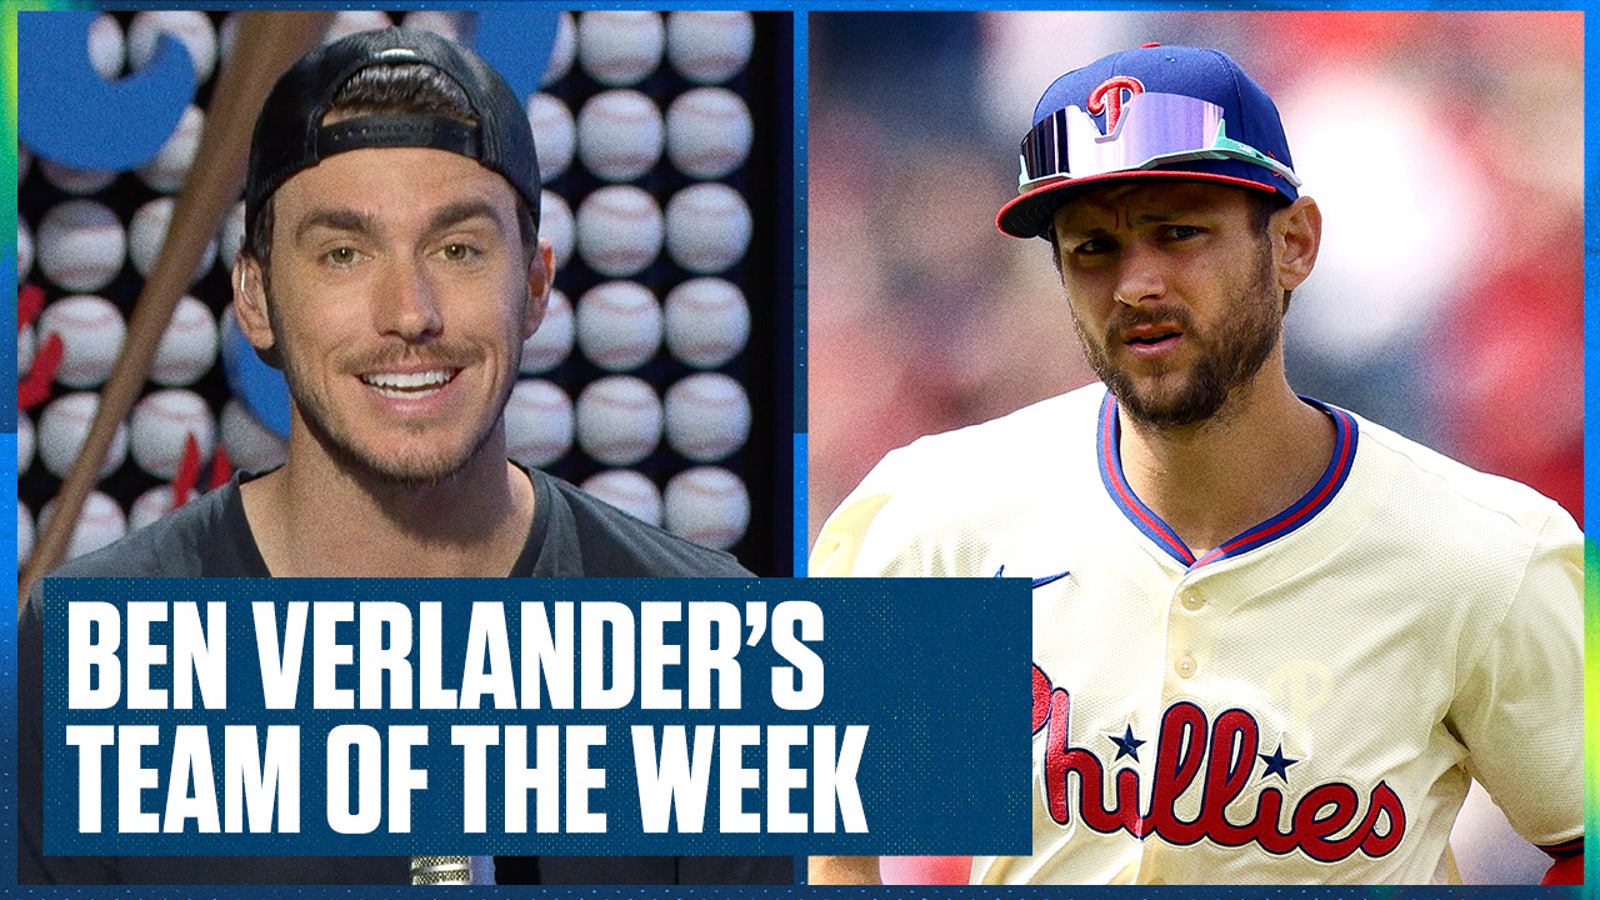 Who were the top performers of the week? Here's Verlander's list